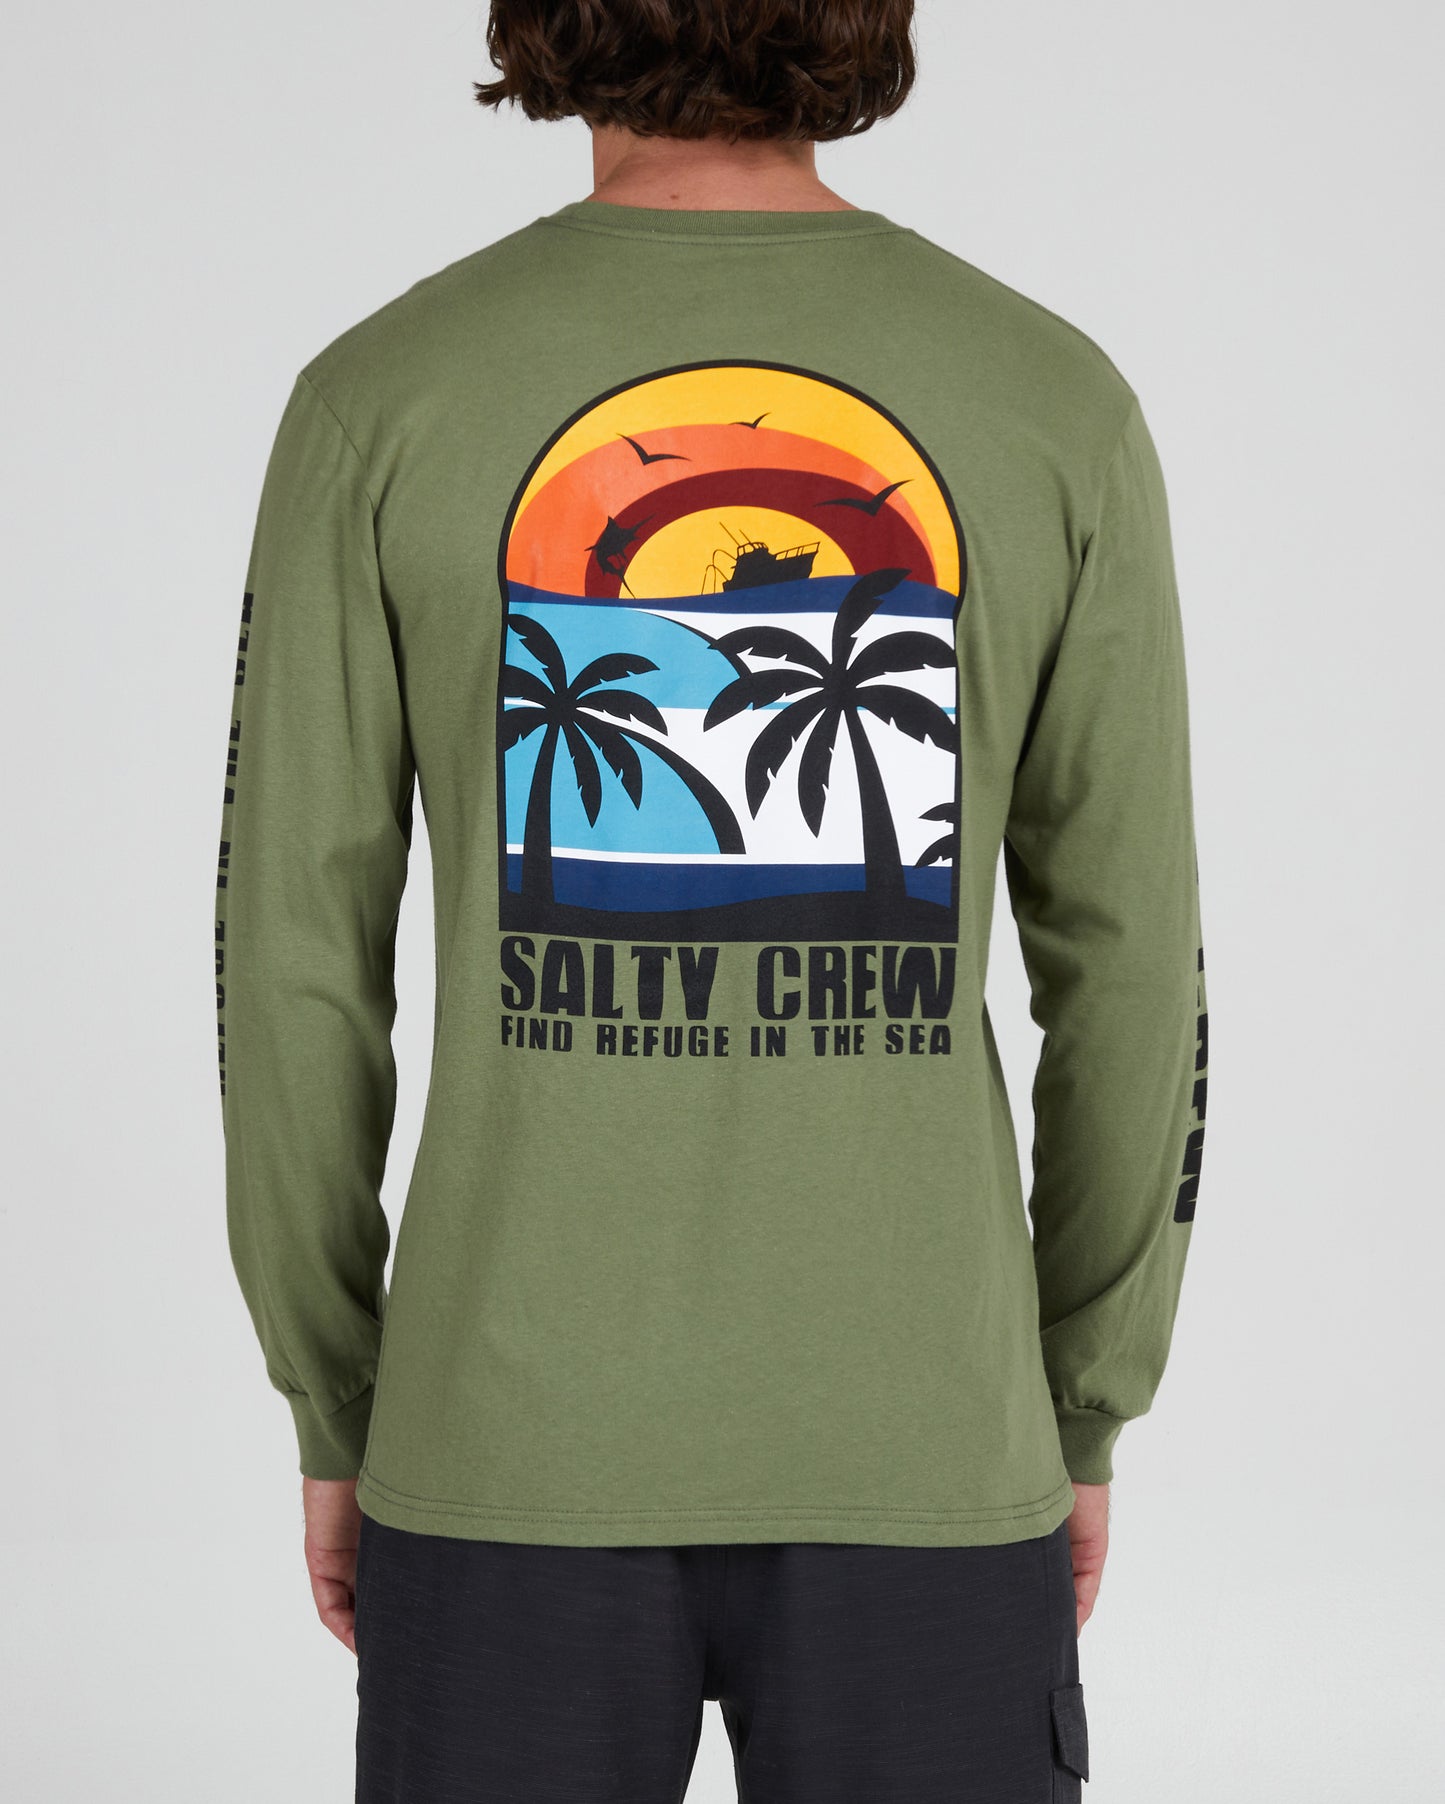 On body back of the Beach Day Sage Green L/S Premium Tee